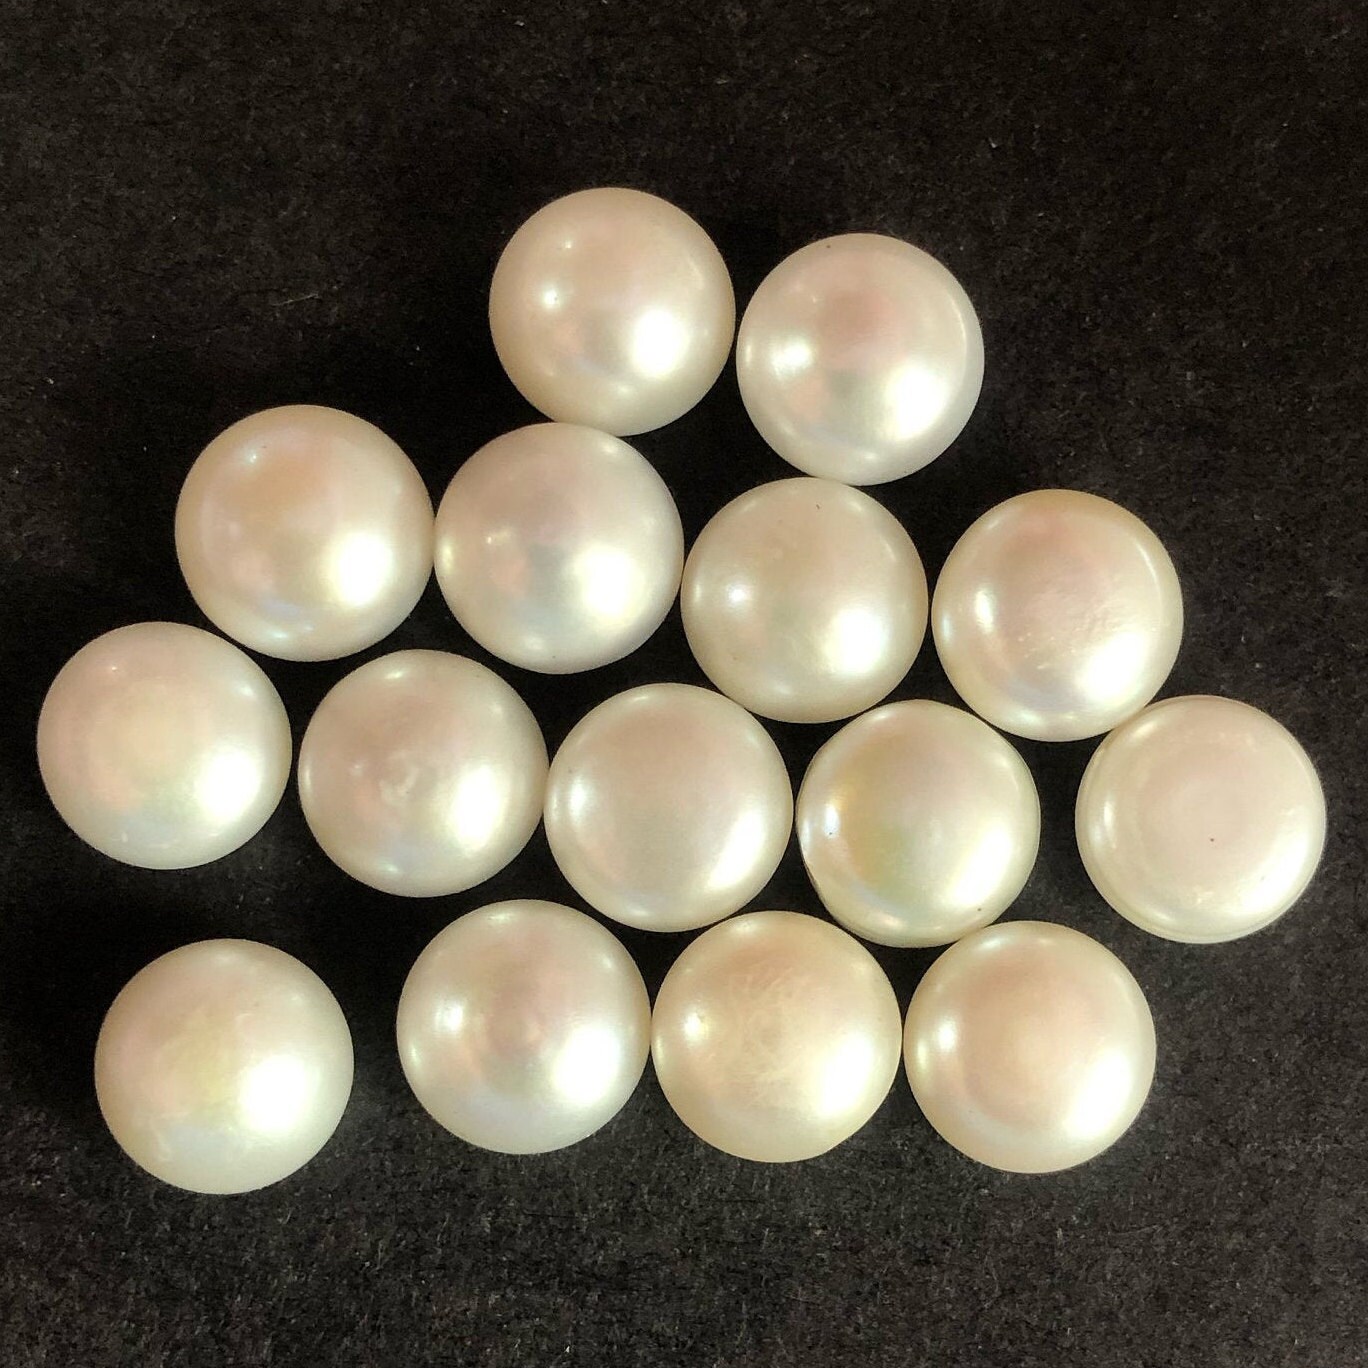 White Cultured Freshwater Pearls Half-Drilled Button 3-4mm - Joopy Gems